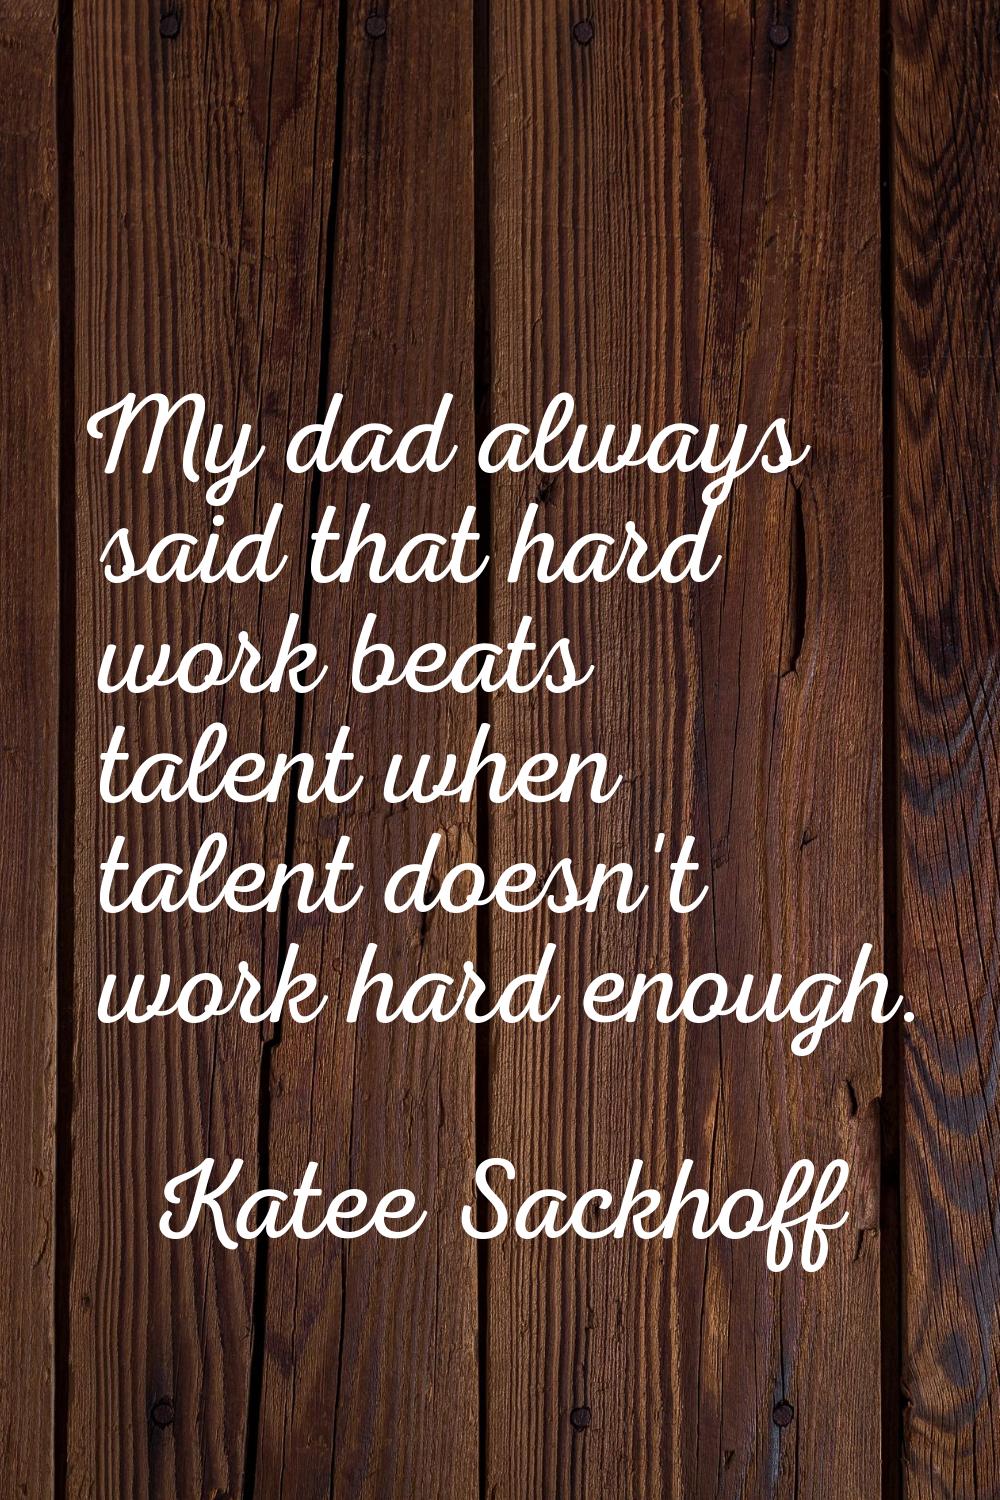 My dad always said that hard work beats talent when talent doesn't work hard enough.